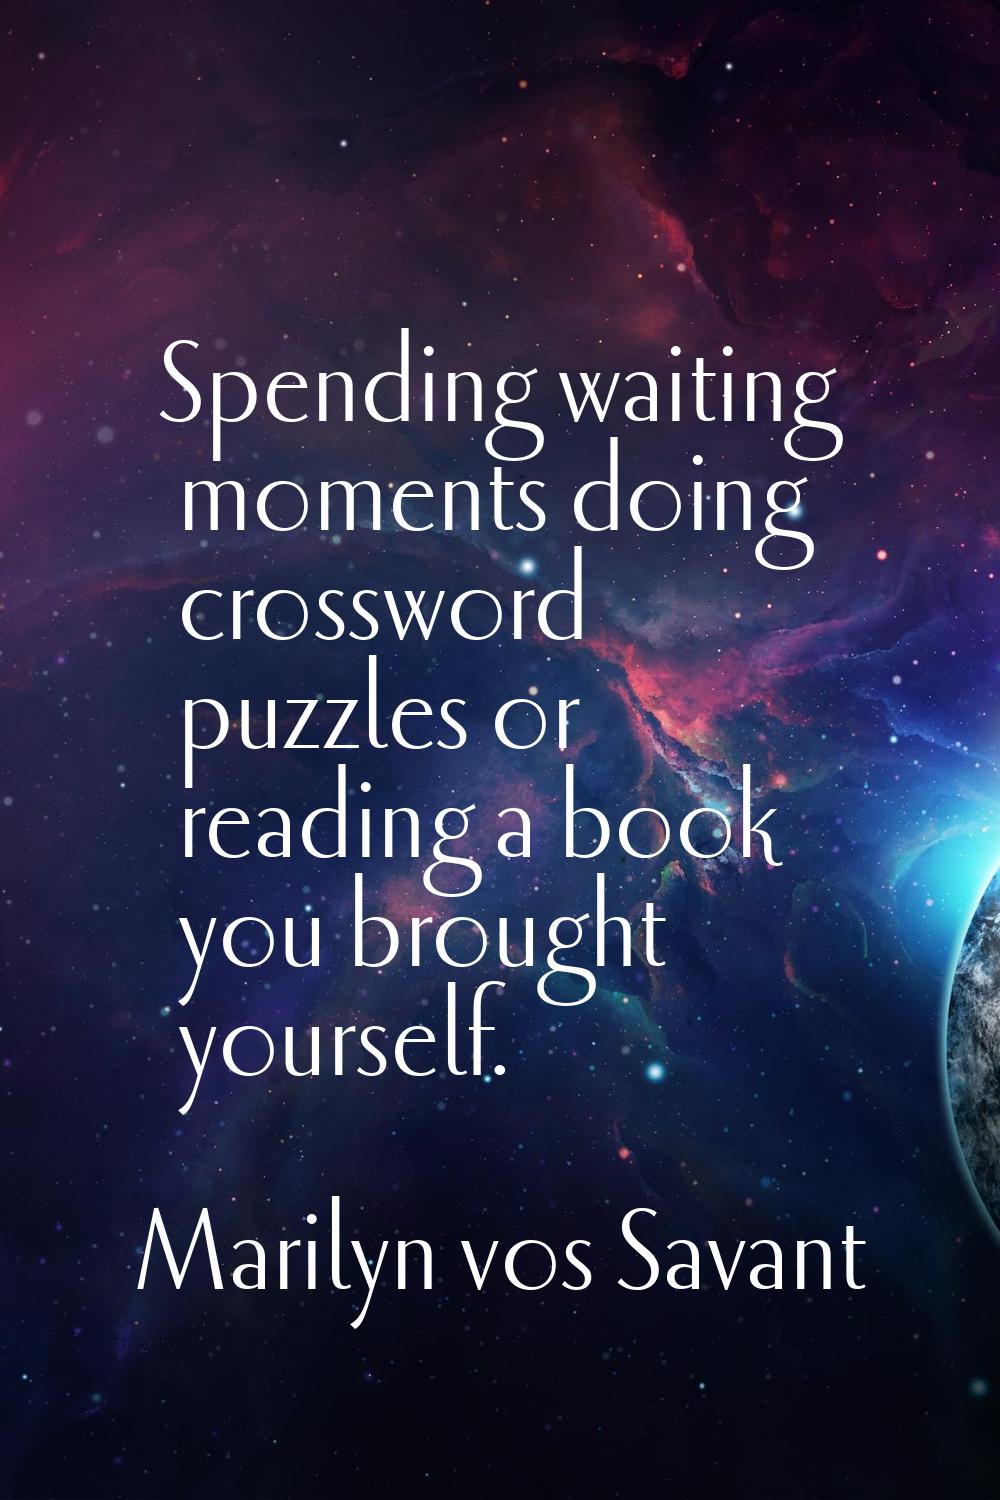 Spending waiting moments doing crossword puzzles or reading a book you brought yourself.